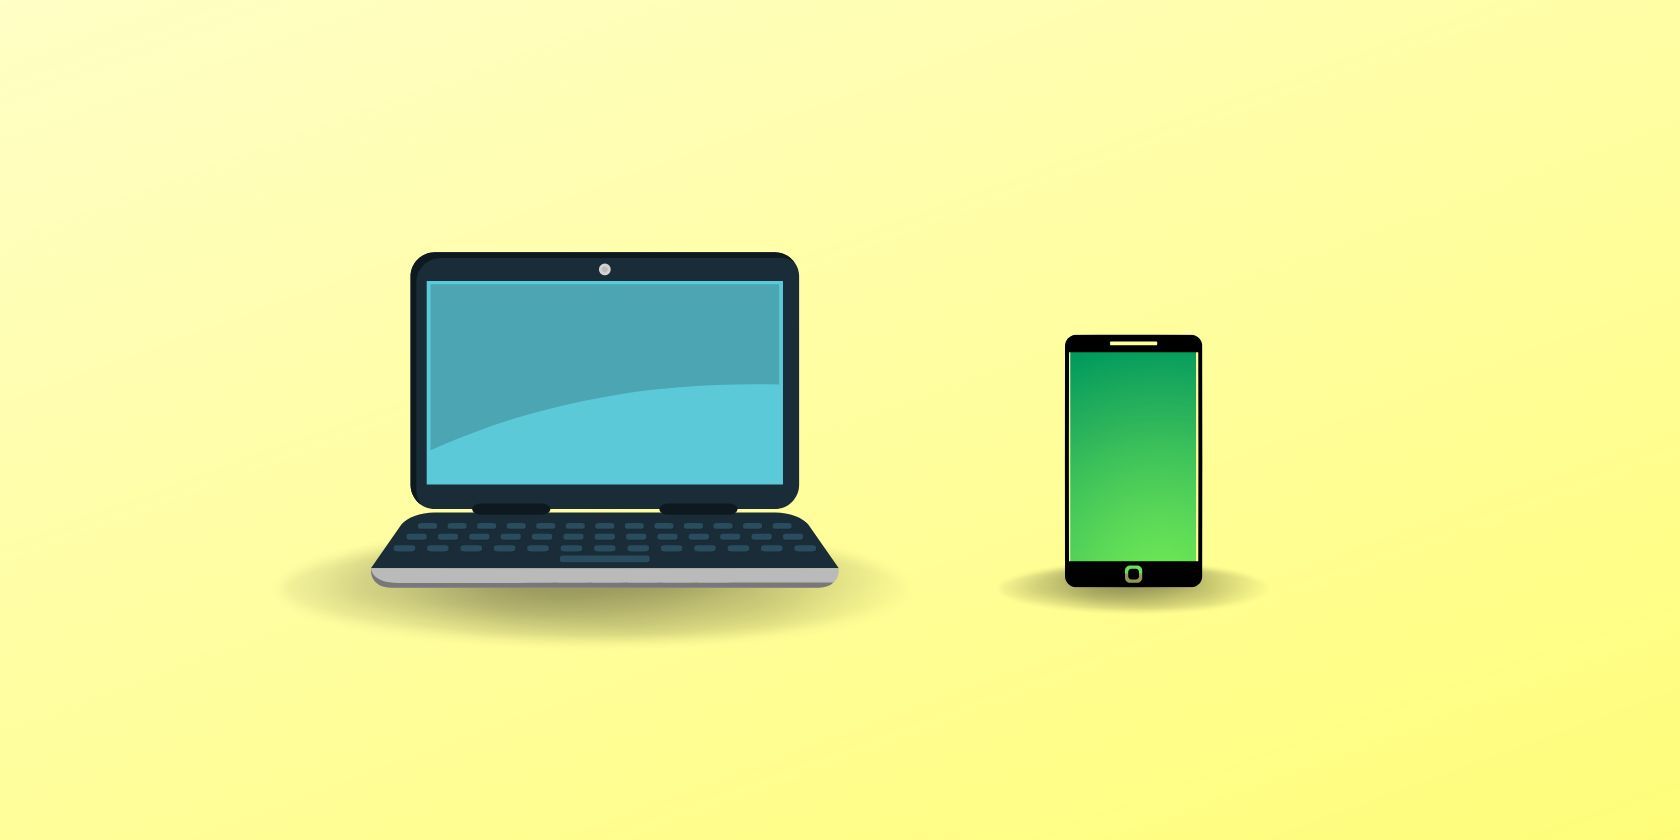 Graphic illustrations of a laptop computer and smartphone seen on yellow background